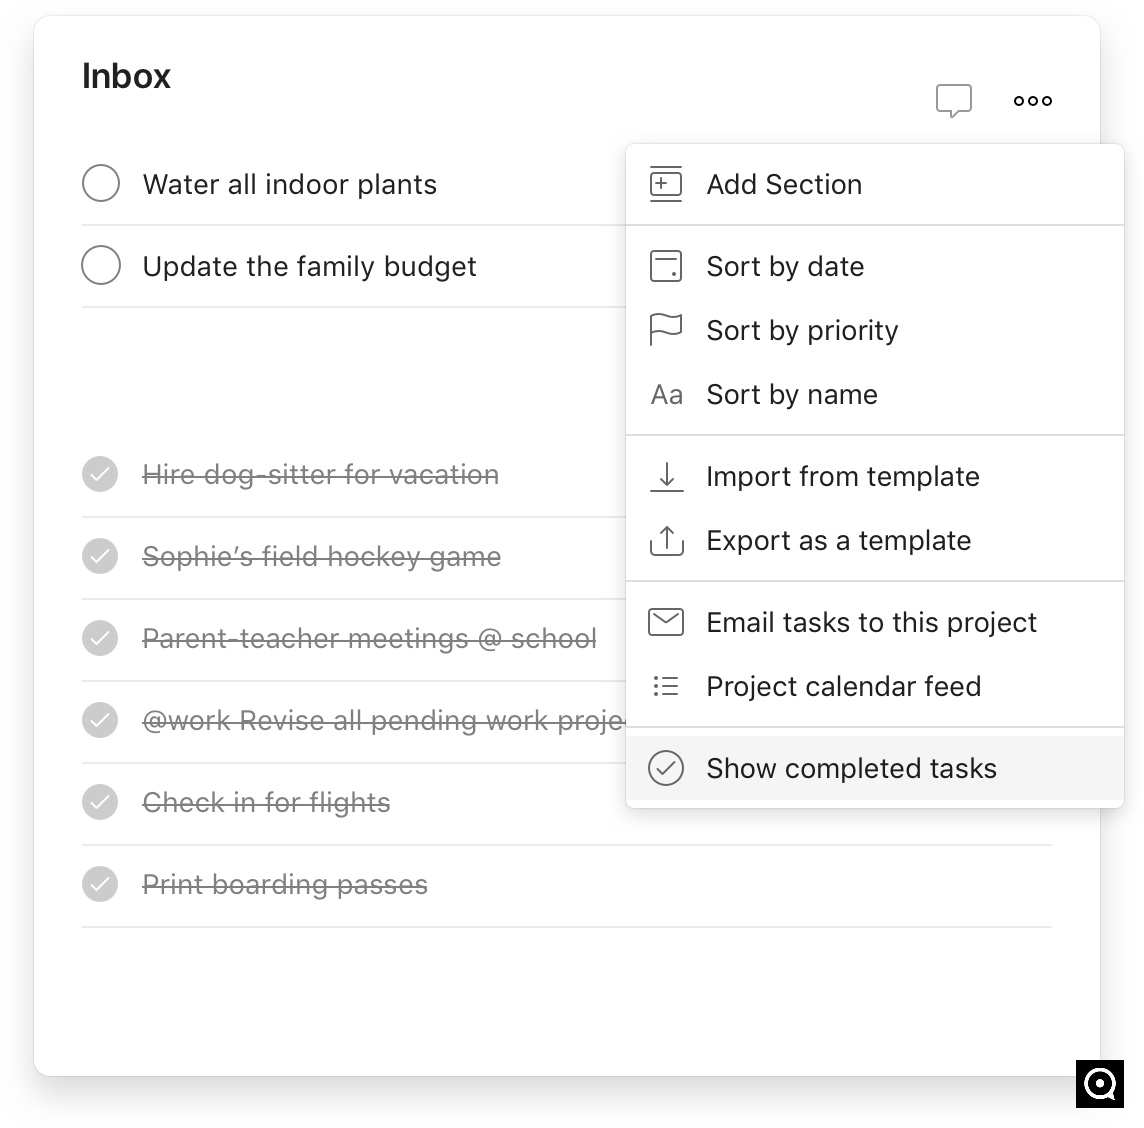 Todoist (154) 7.3 : completed tasks in todoist user interface